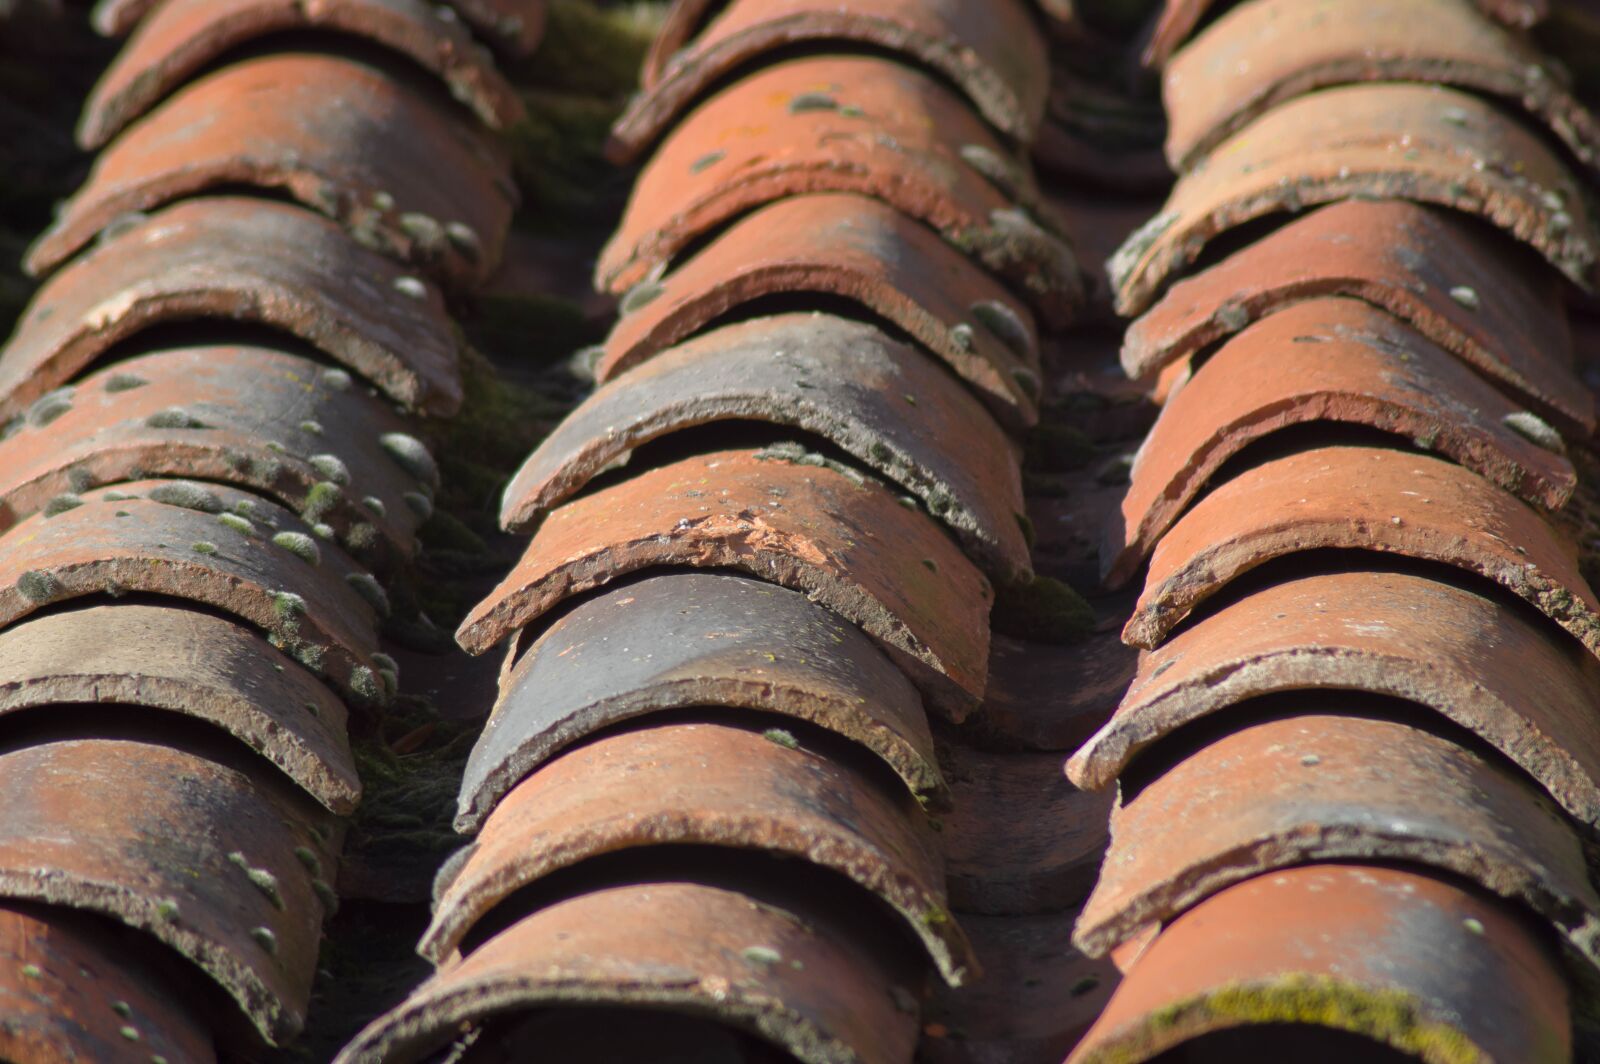 Pentax KP sample photo. Roofing, tiles, texture photography